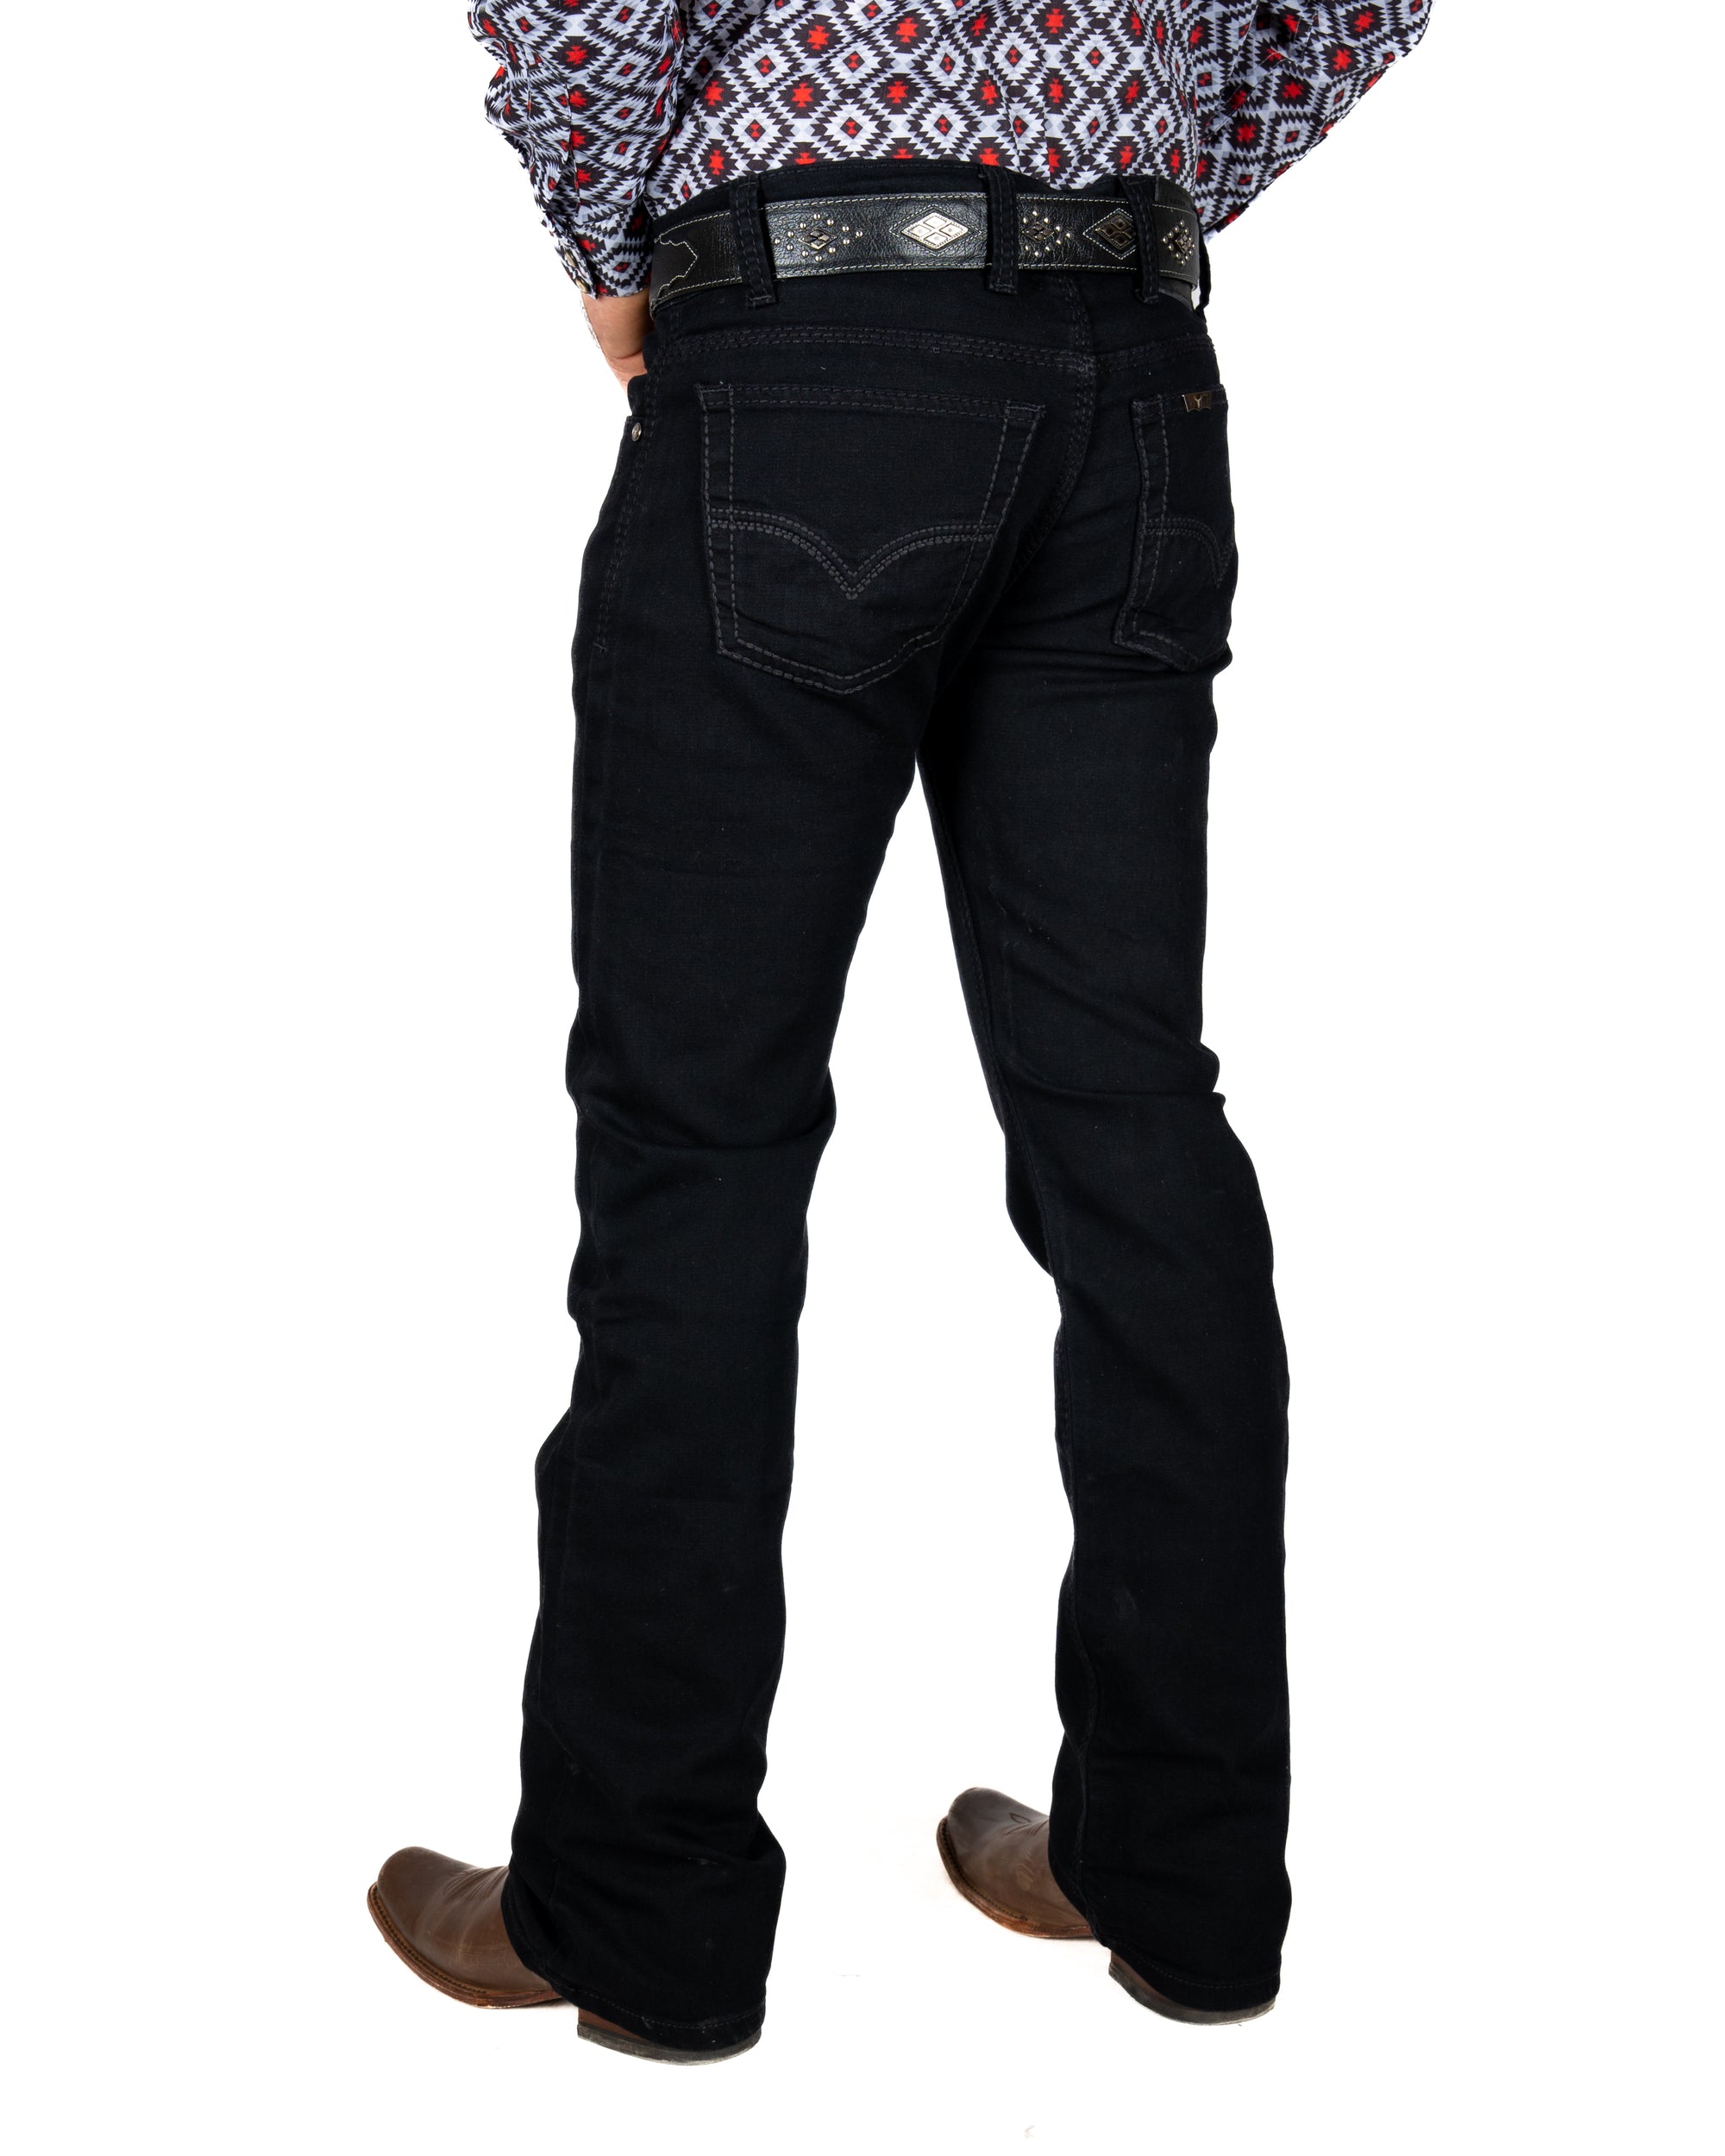 Jeans Rodeo West CB300 Caballero